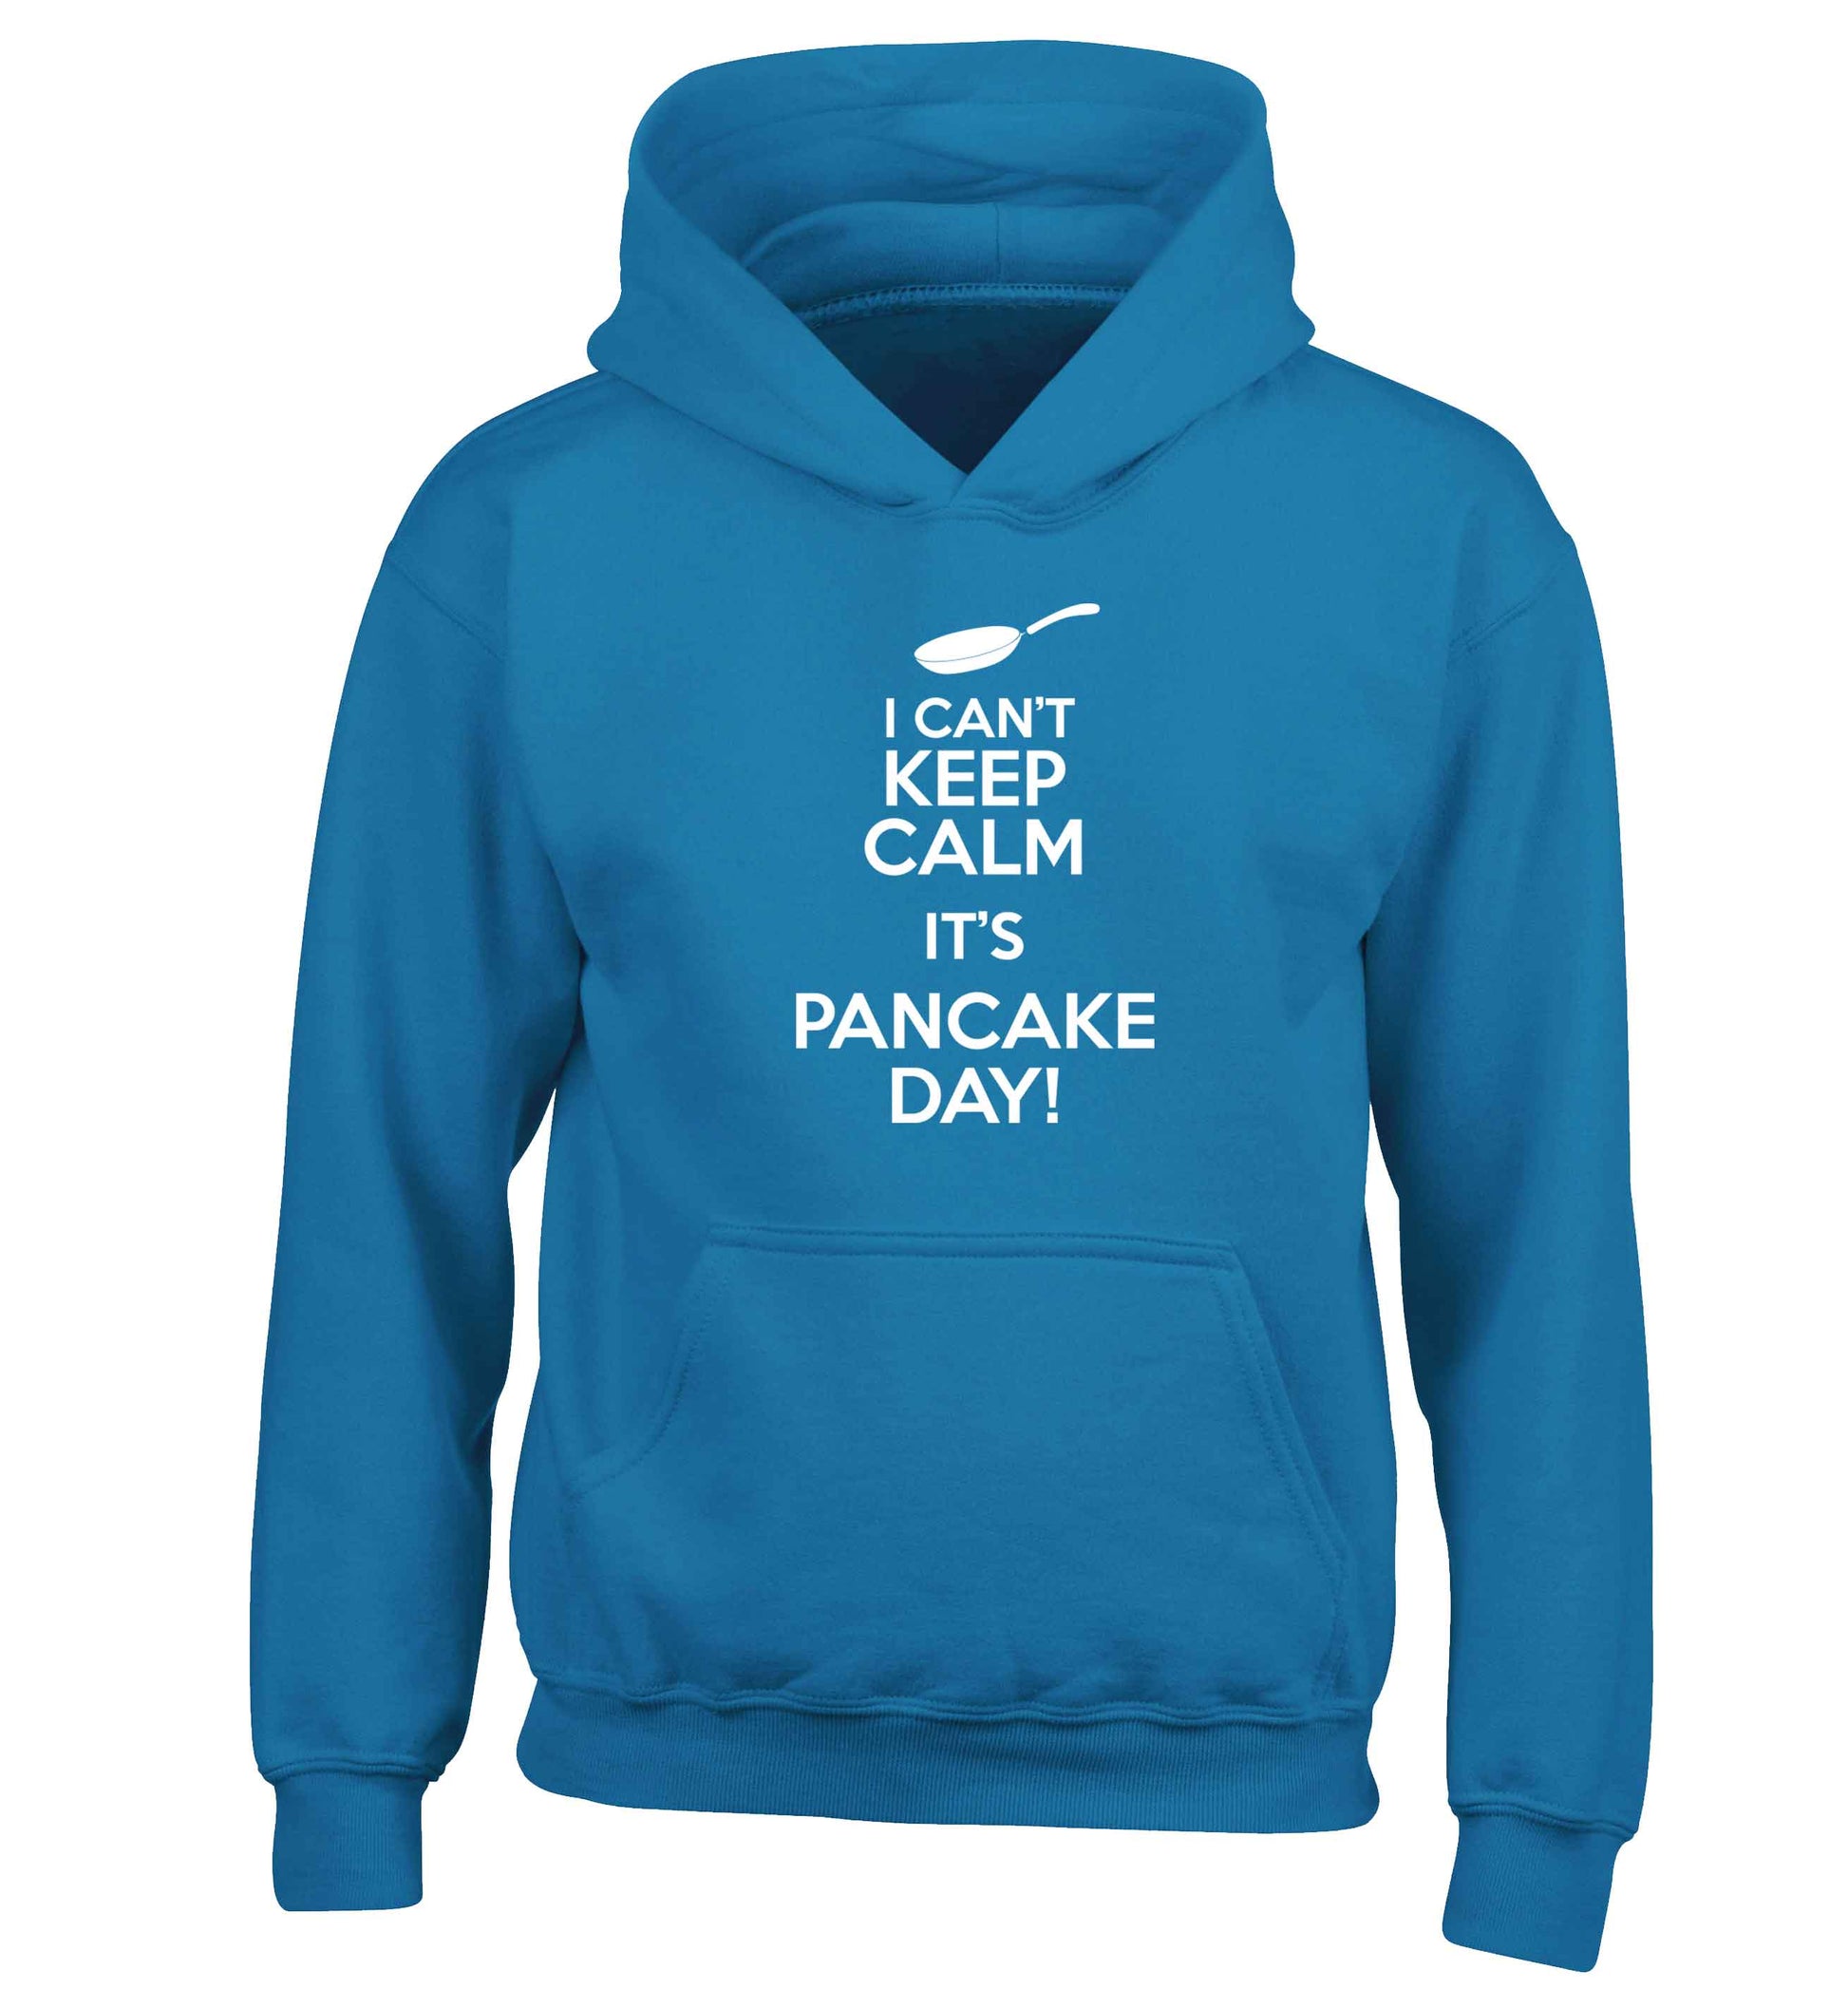 I can't keep calm it's pancake day! children's blue hoodie 12-13 Years